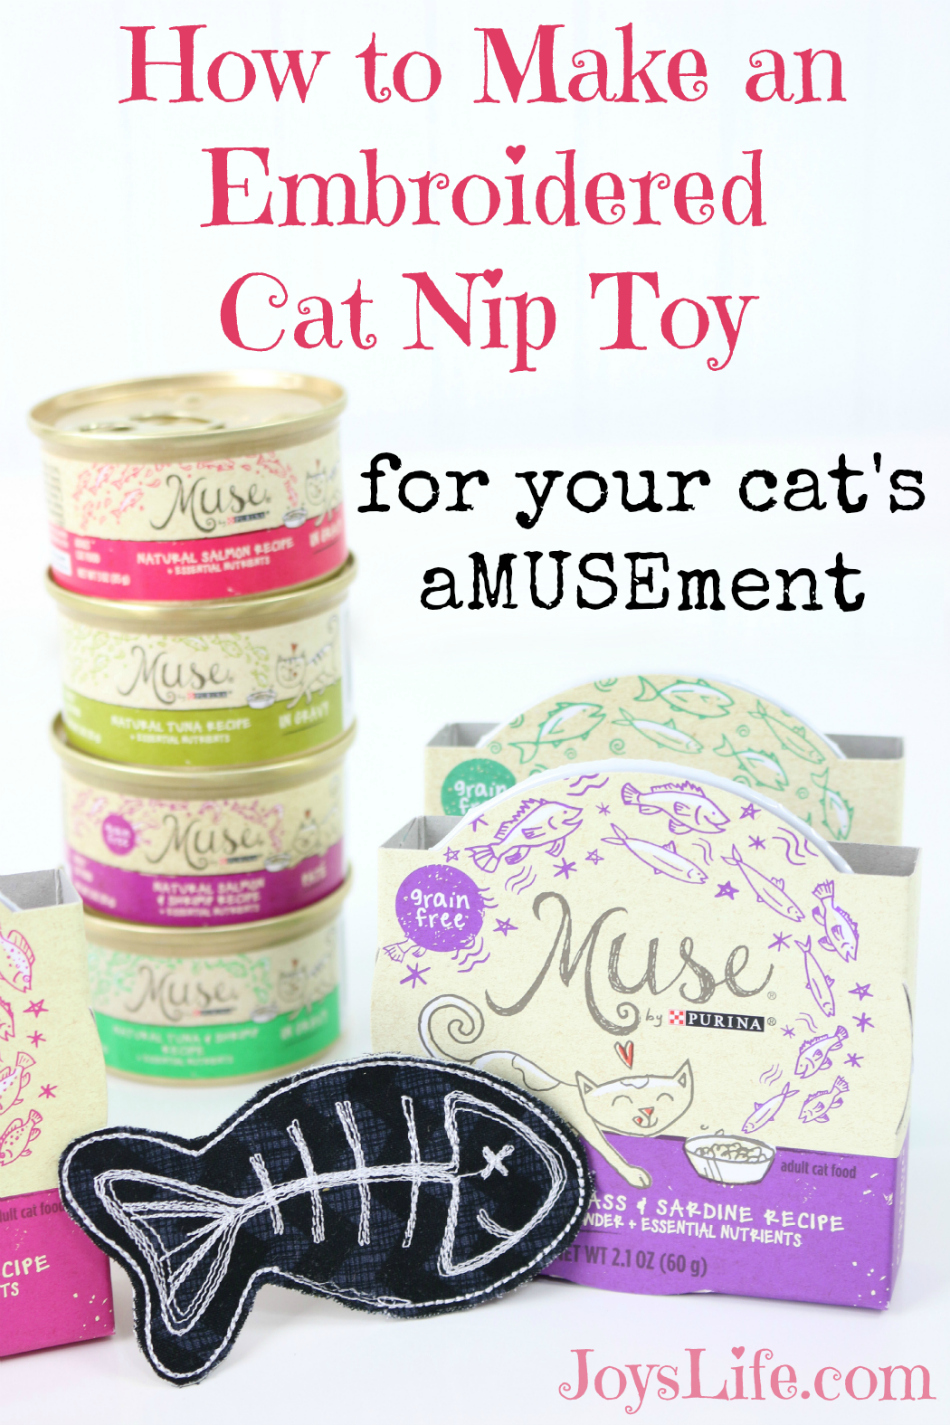 How to Make an Embroidered Cat Nip Toy